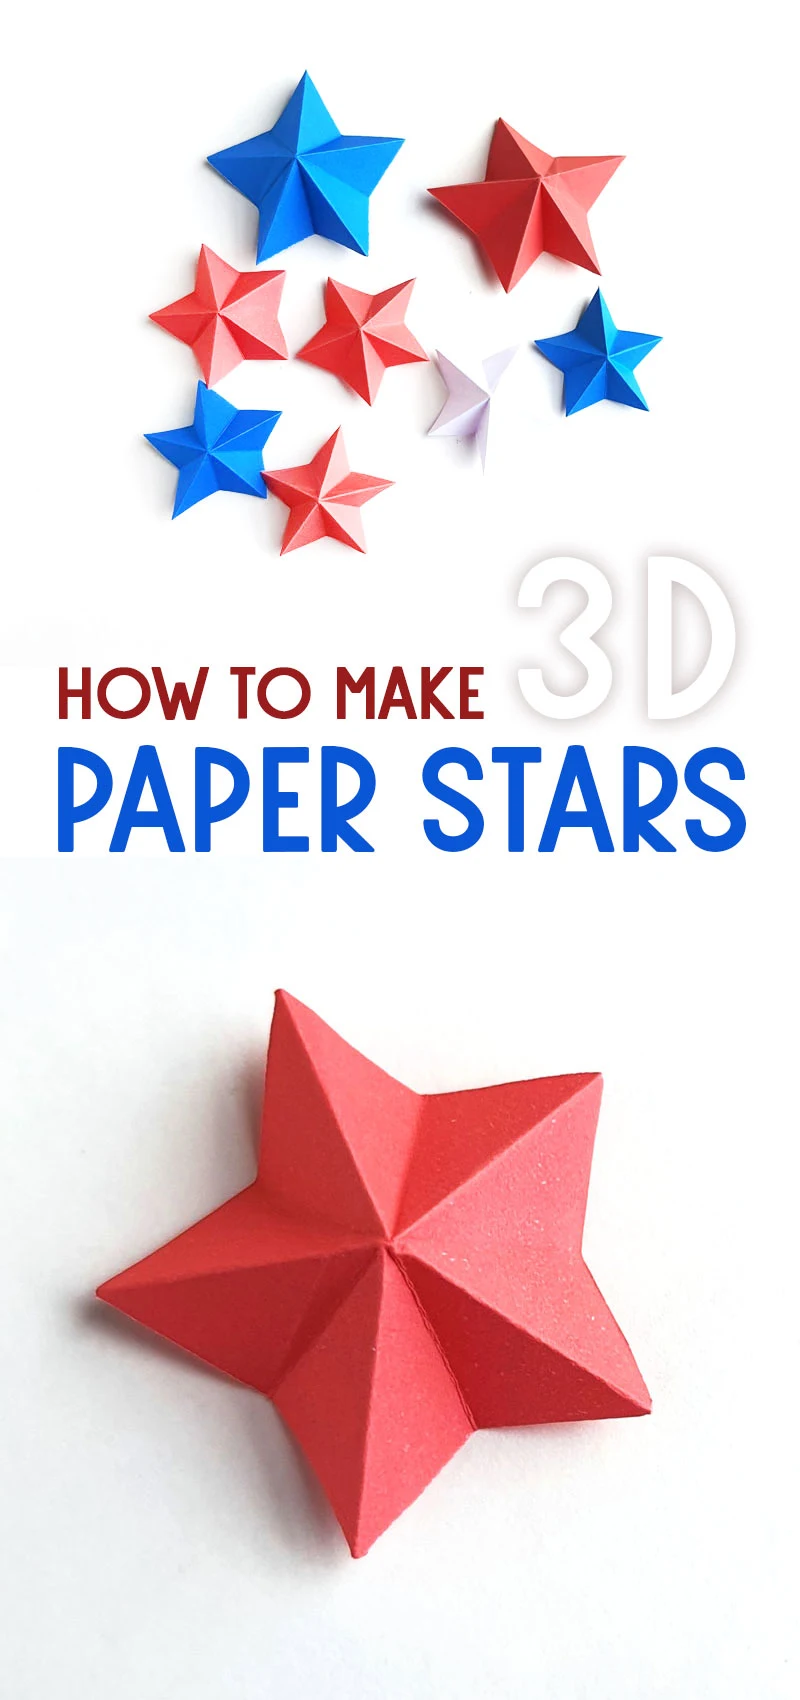 how to make paper 3D stars - hero collage with text and white background